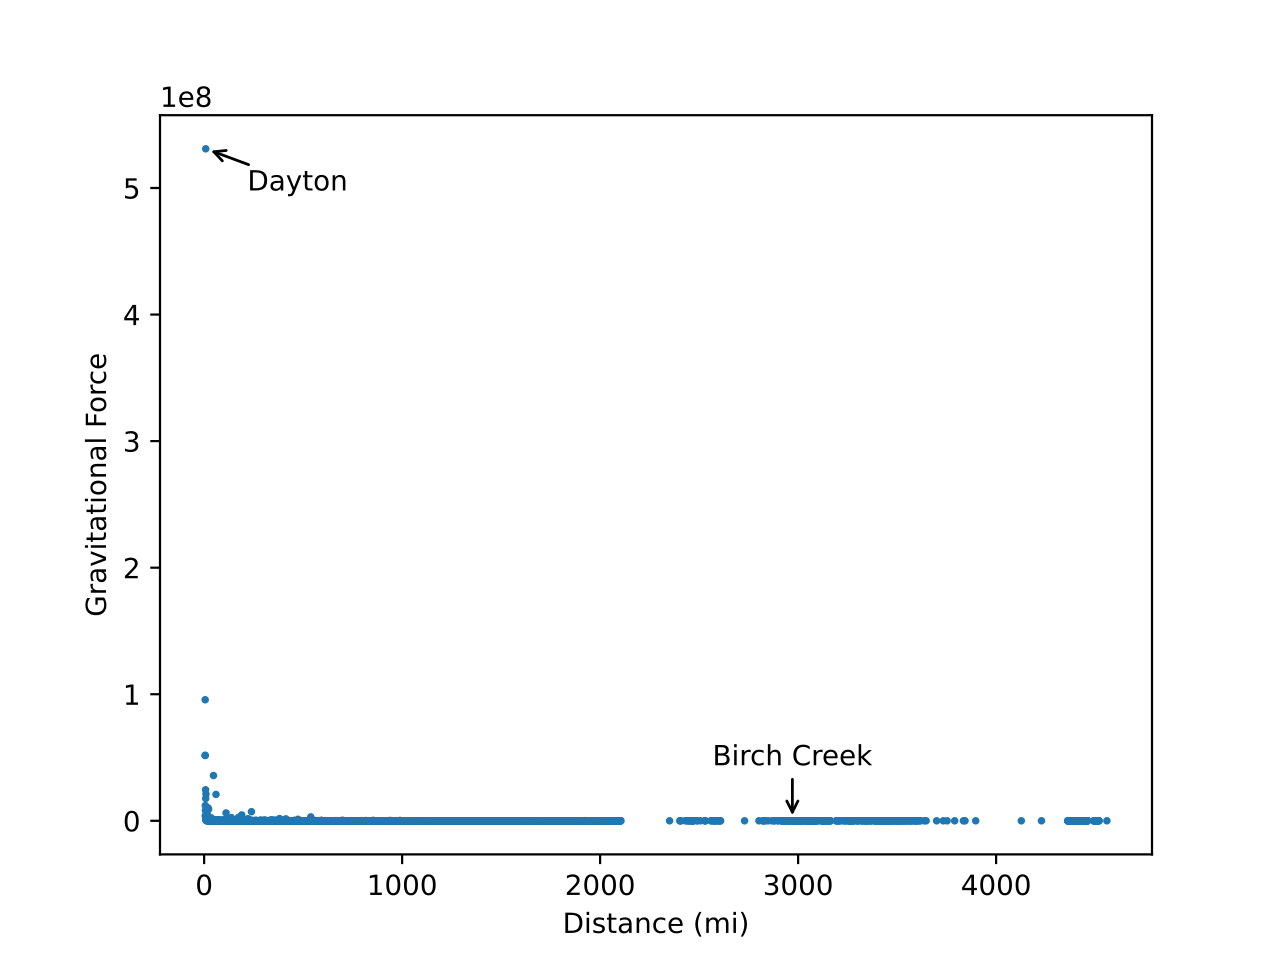 Scatter plot with distance (miles) on the x-axis, and gravitational force on the Y-axis. Dayton is a substantial outlier.